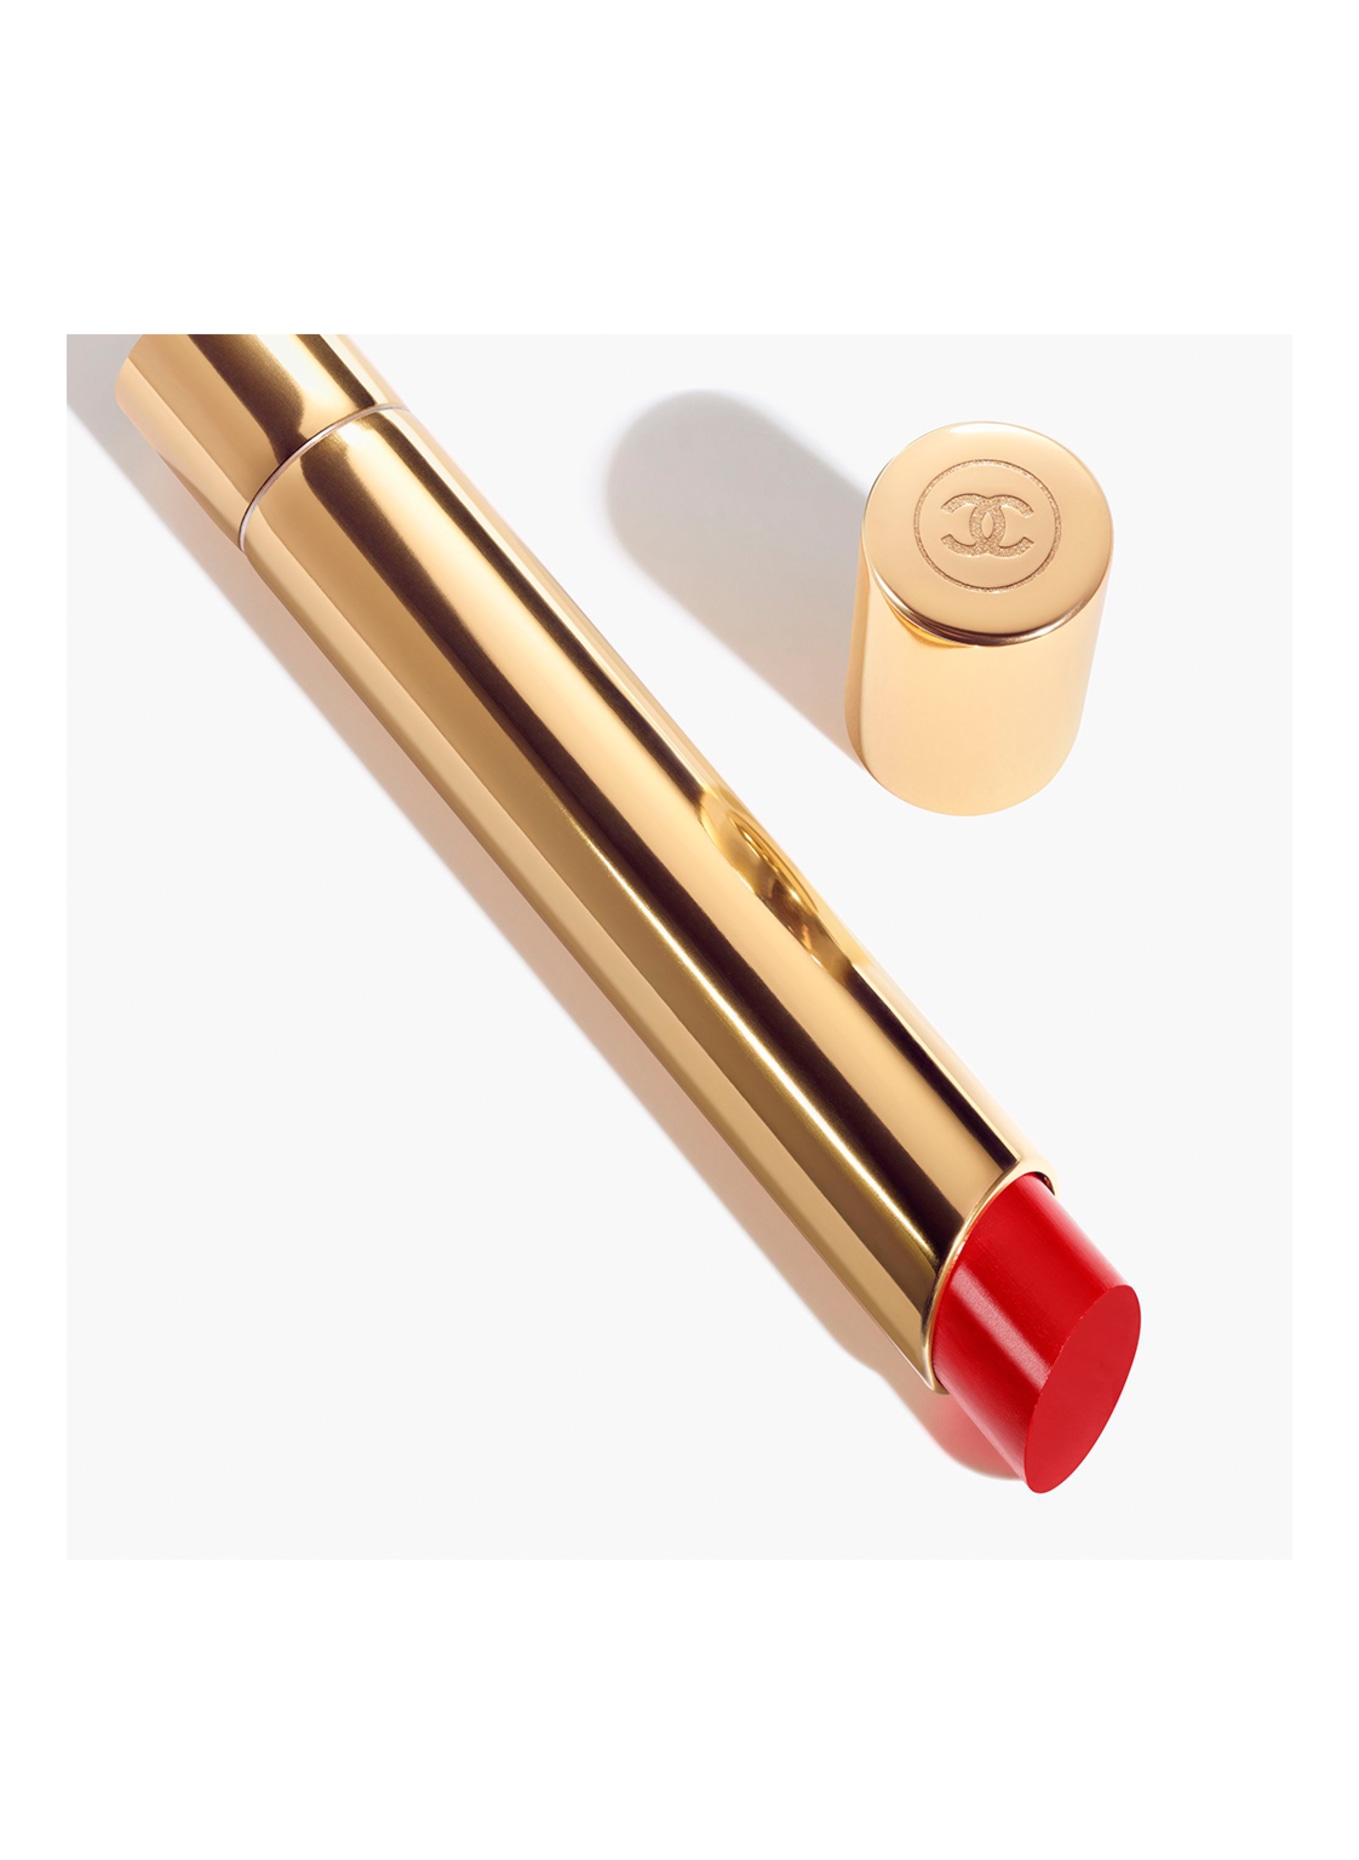 CHANEL ROUGE ALLURE L'EXTRAIT EXKLUSIVKREATION, Farbe: 854 ROUGE PUISSANT (Bild 2)